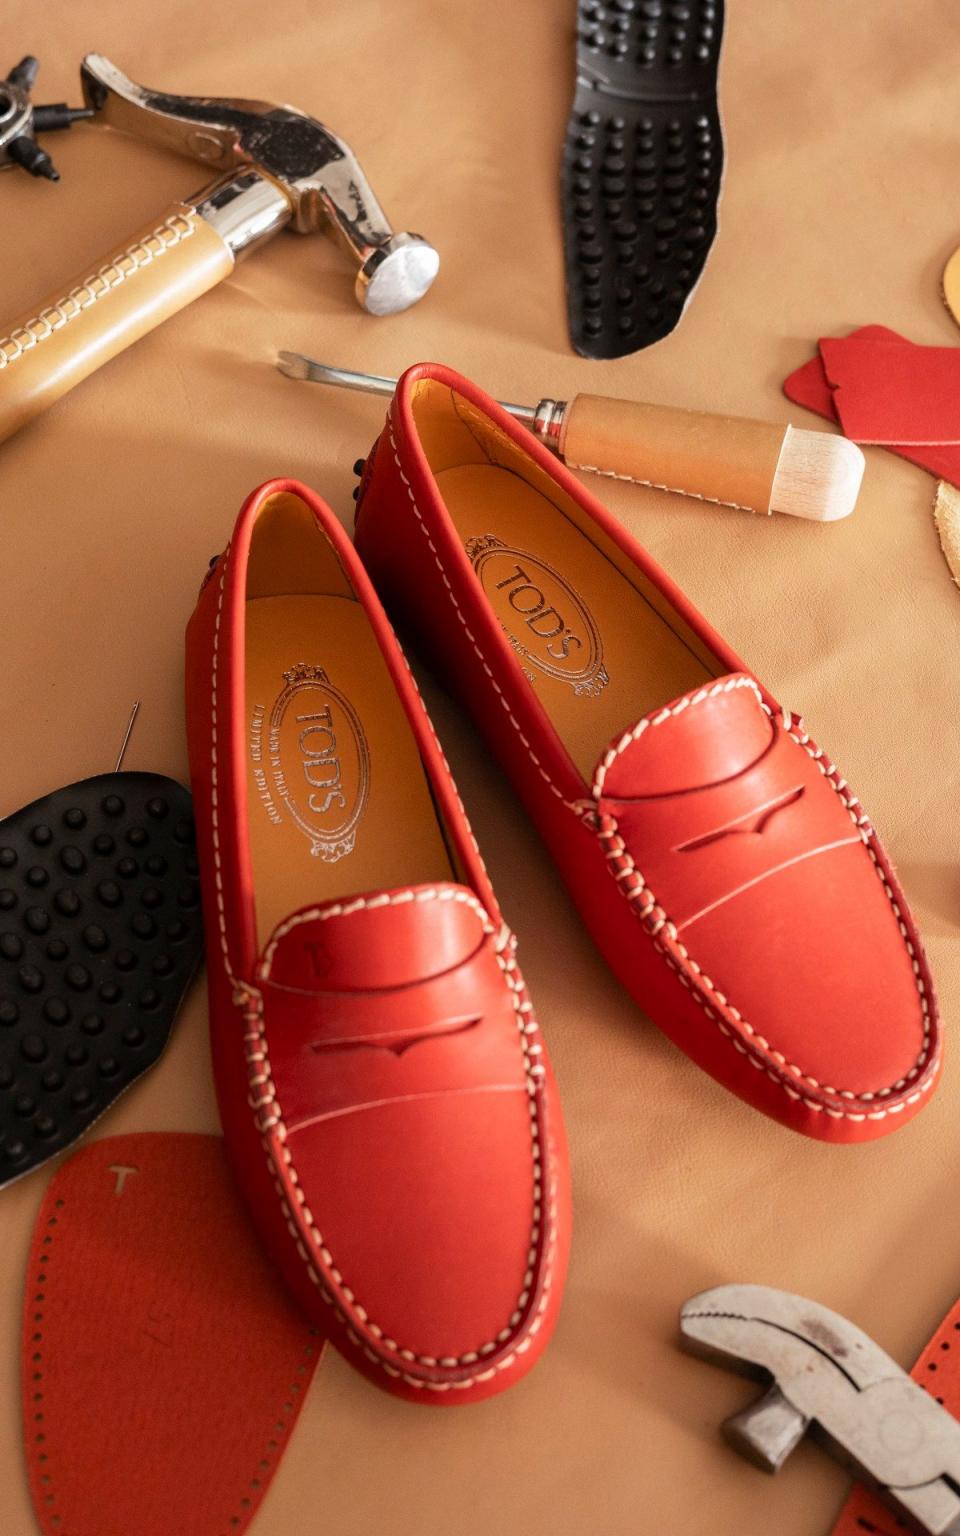 The new Tod's Gommino loafer celebrates Venice with it's rich Titian red colour scheme